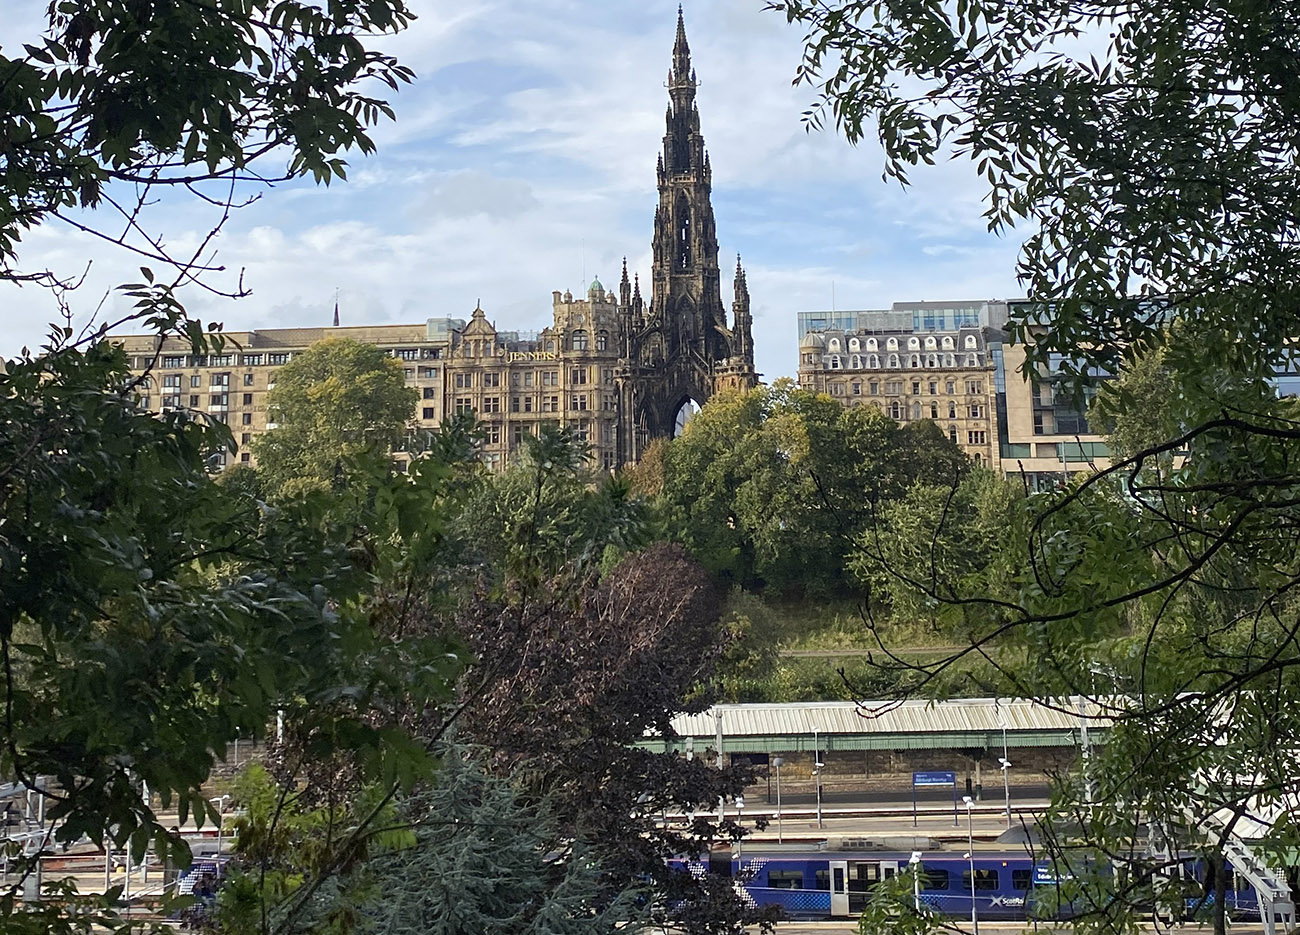 View of Princes Street. A train in the foreground and the Scott monument in the background.